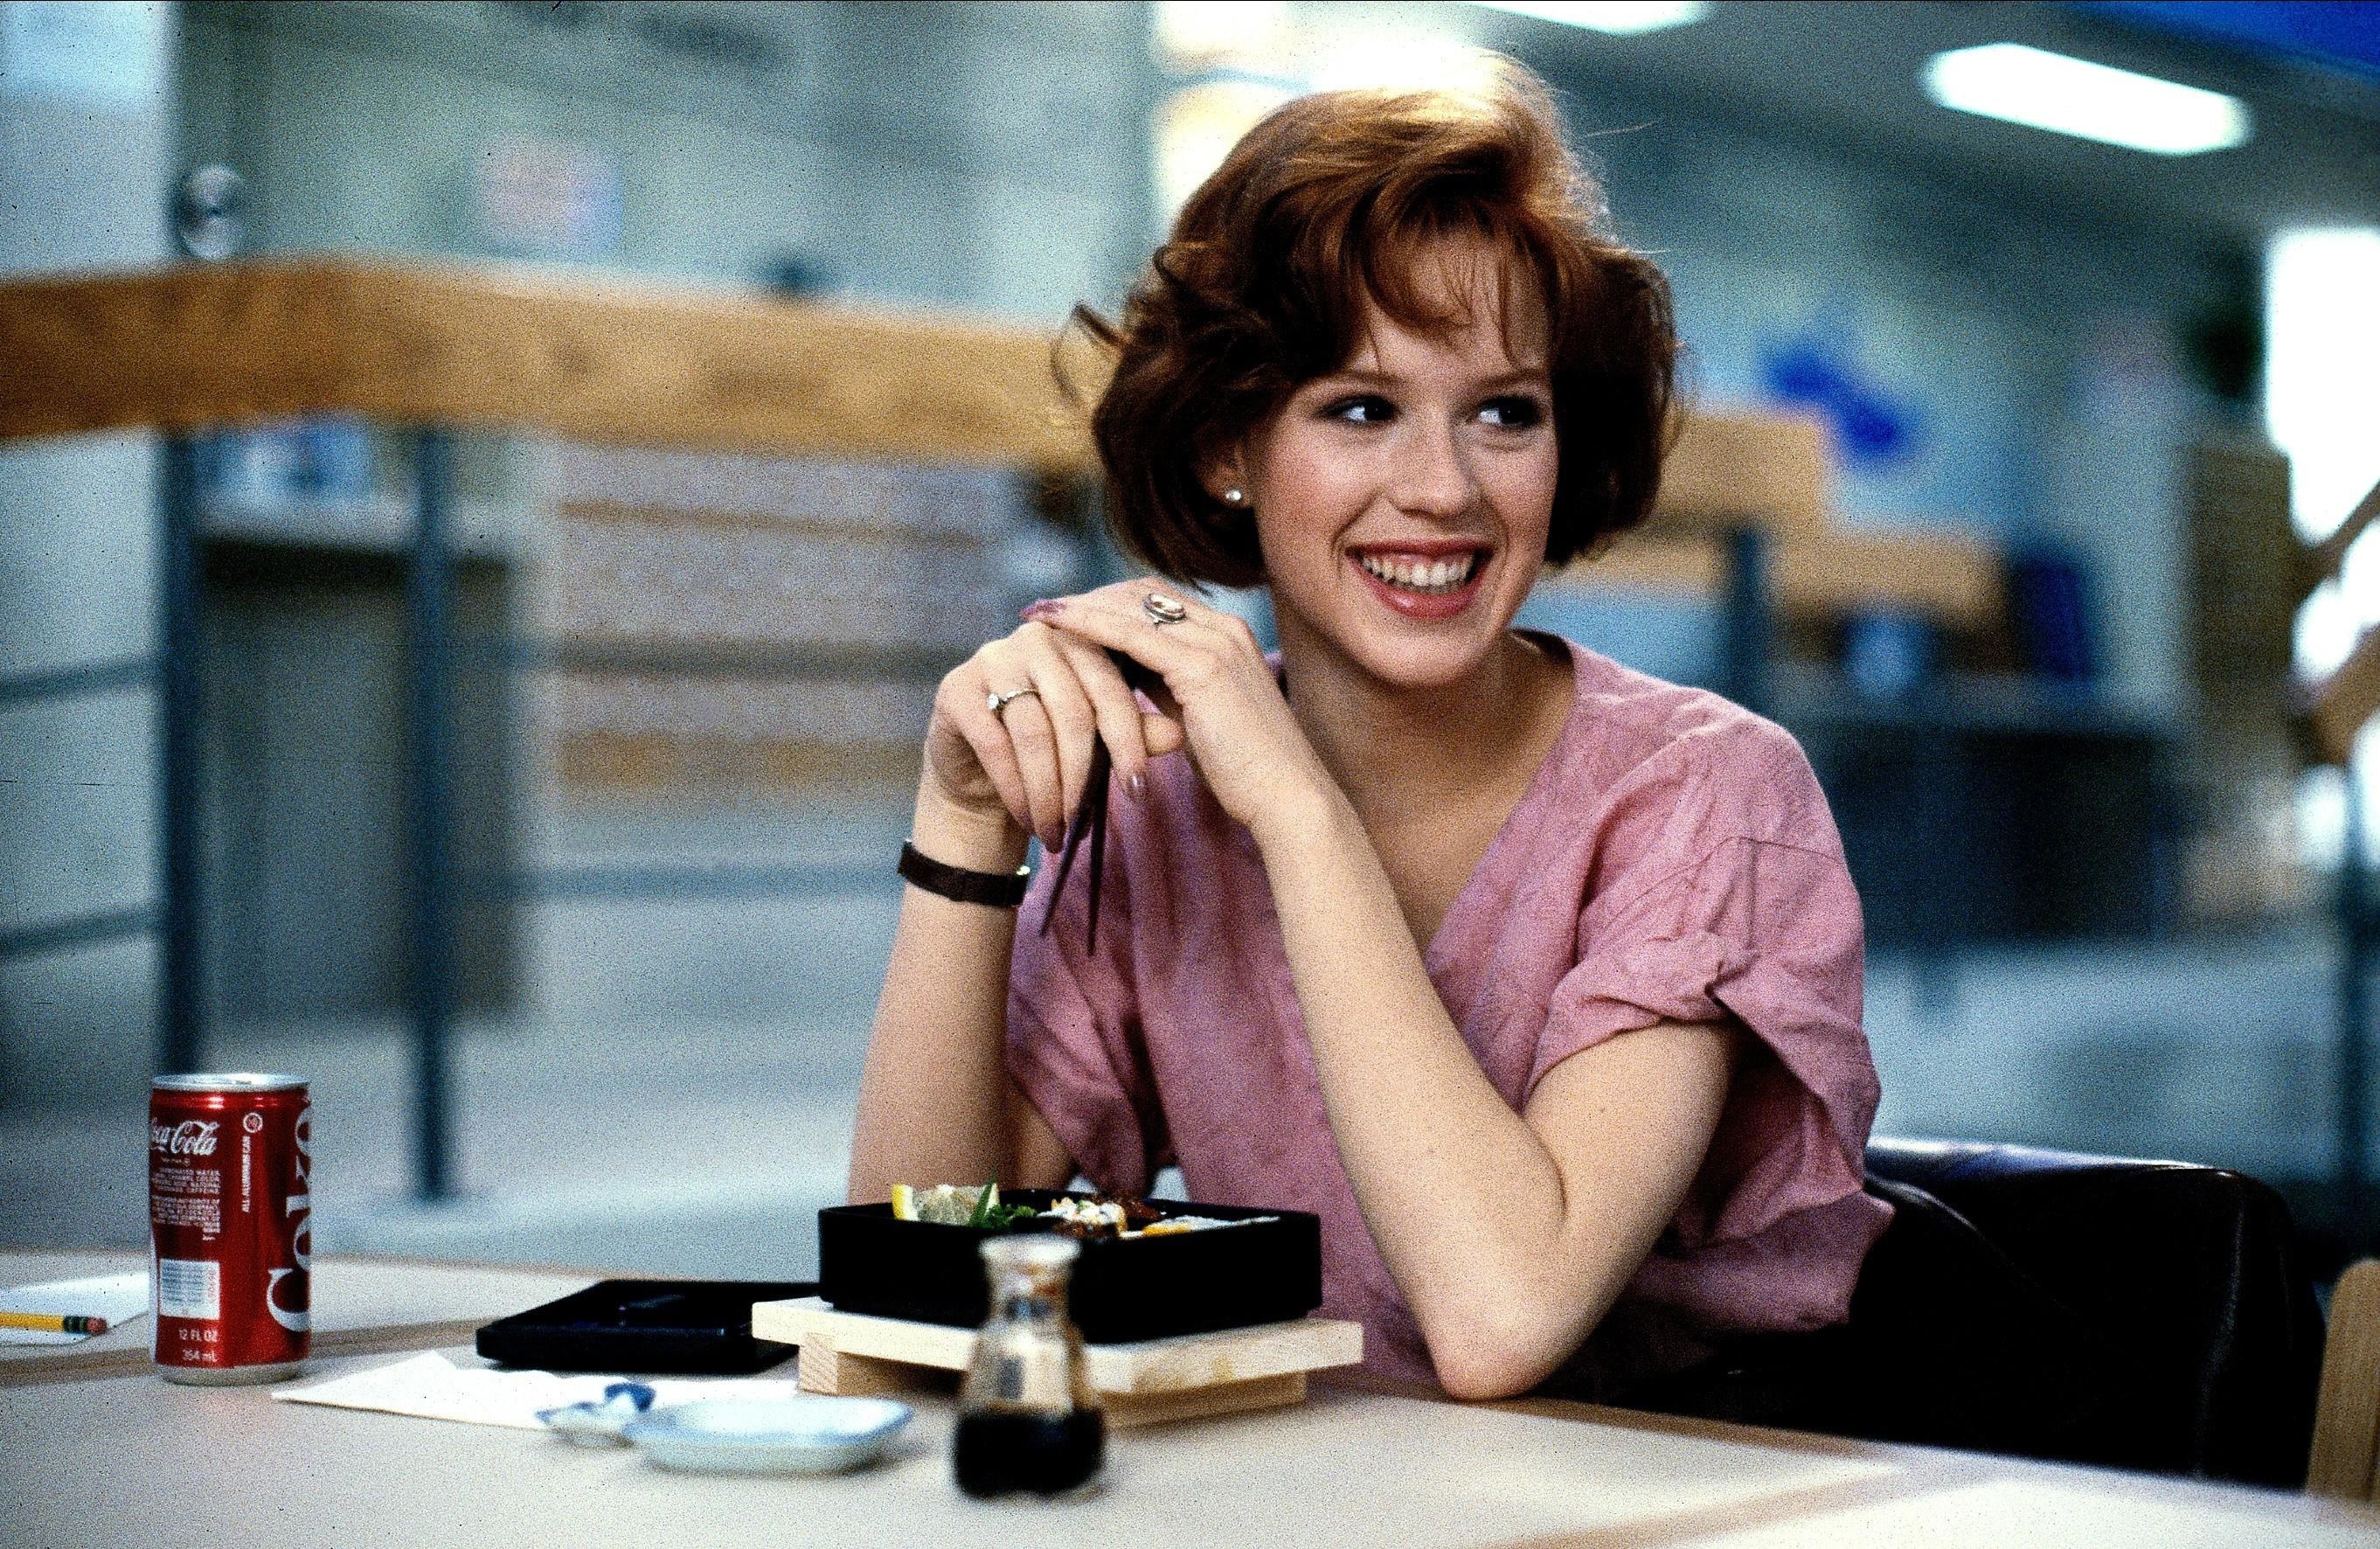 Molly Ringwald smiling with chop sticks in her hand during filming for the movie titled the breakfast club